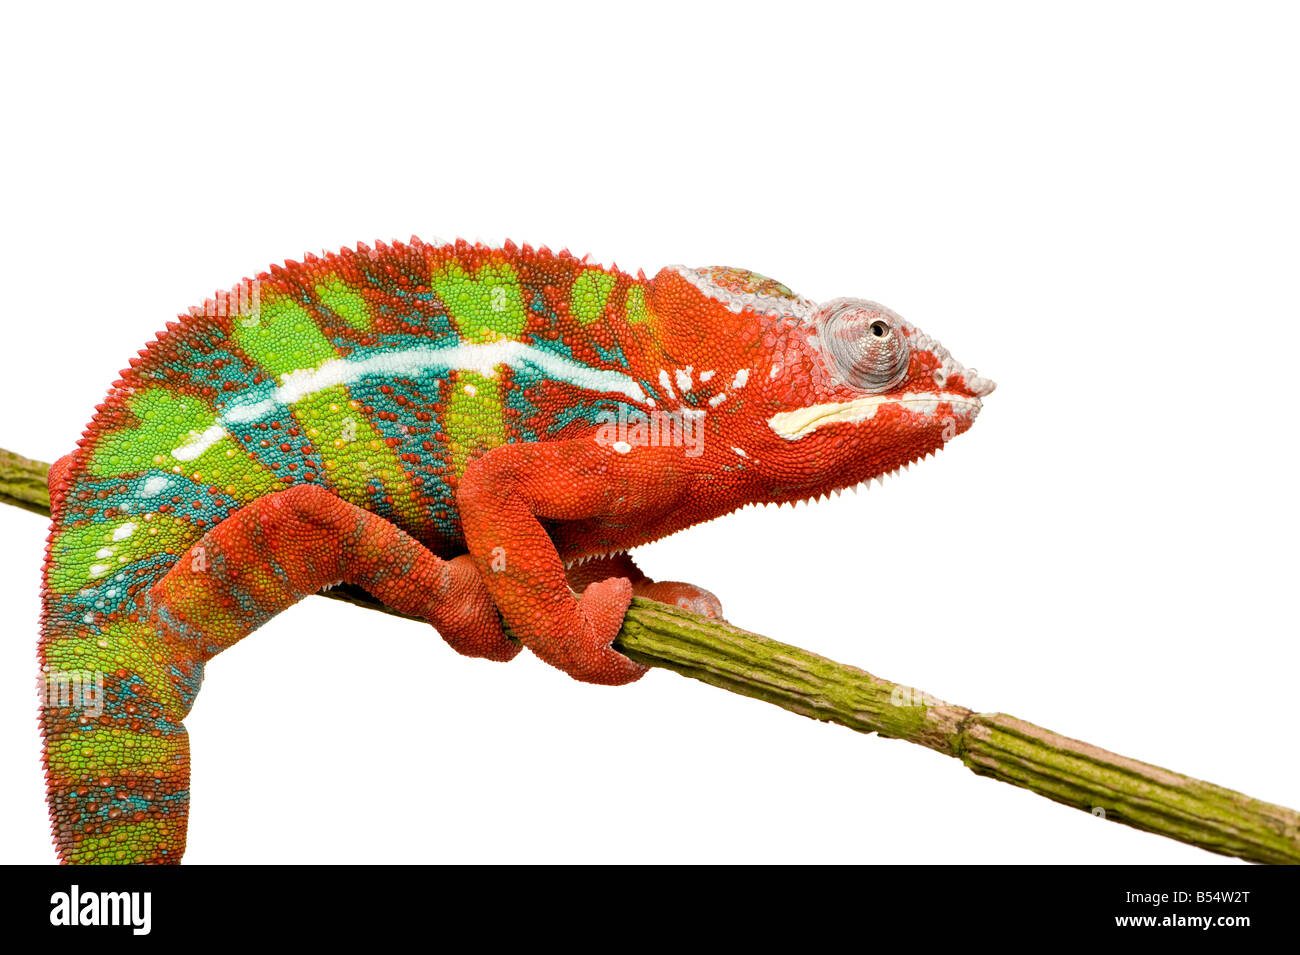 Chameleon Furcifer Pardalis Ambilobe 18 months in front of a white background Stock Photo